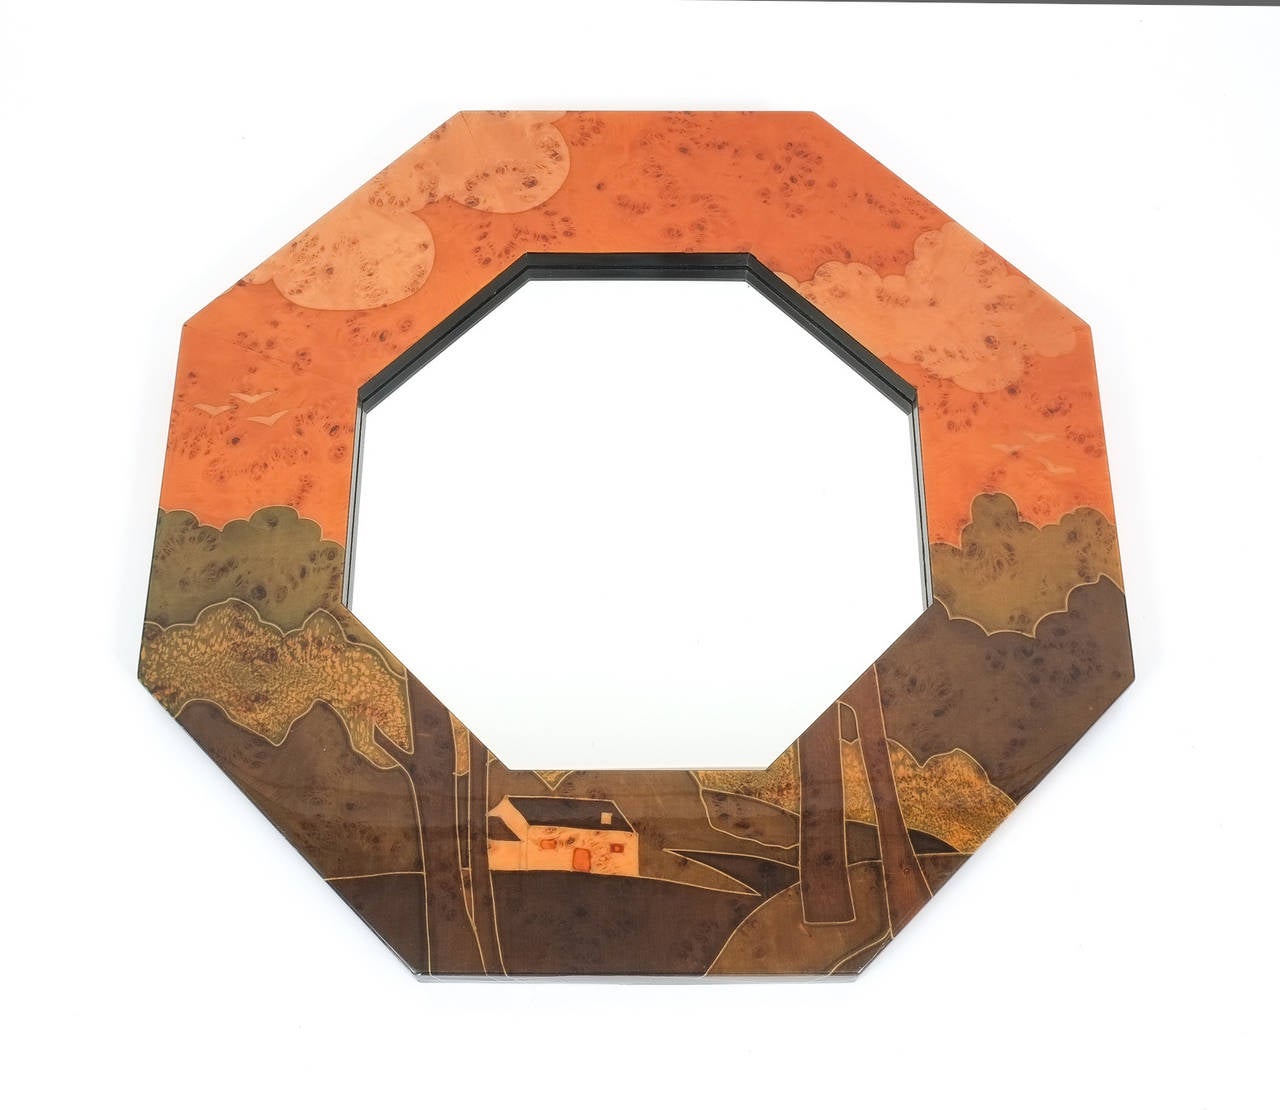 Jean Claude Mahey Paris octagonal marquetry mirror, 1970 with a diameter of 28 inches, it's in excellent condition.